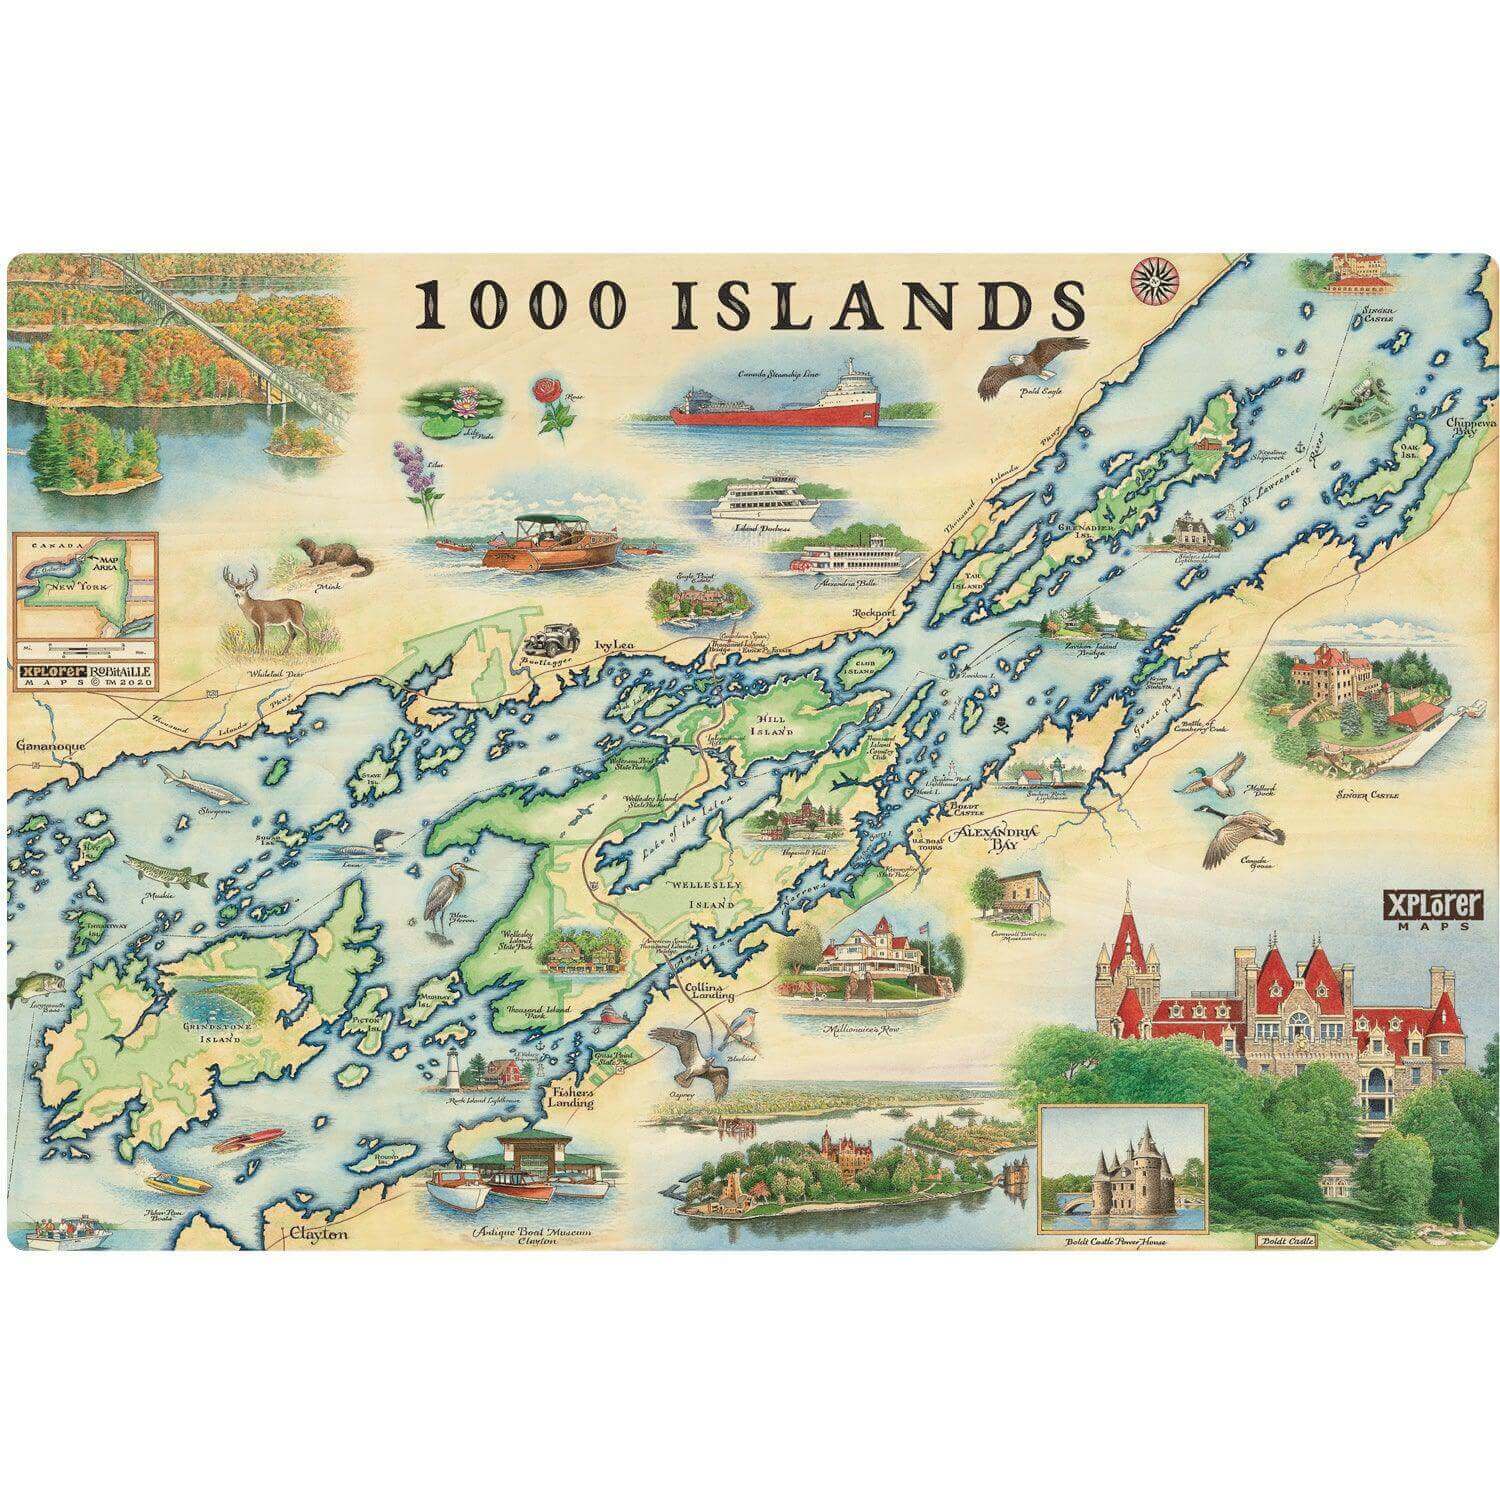 The 1000 Islands Map Wood signs are 15